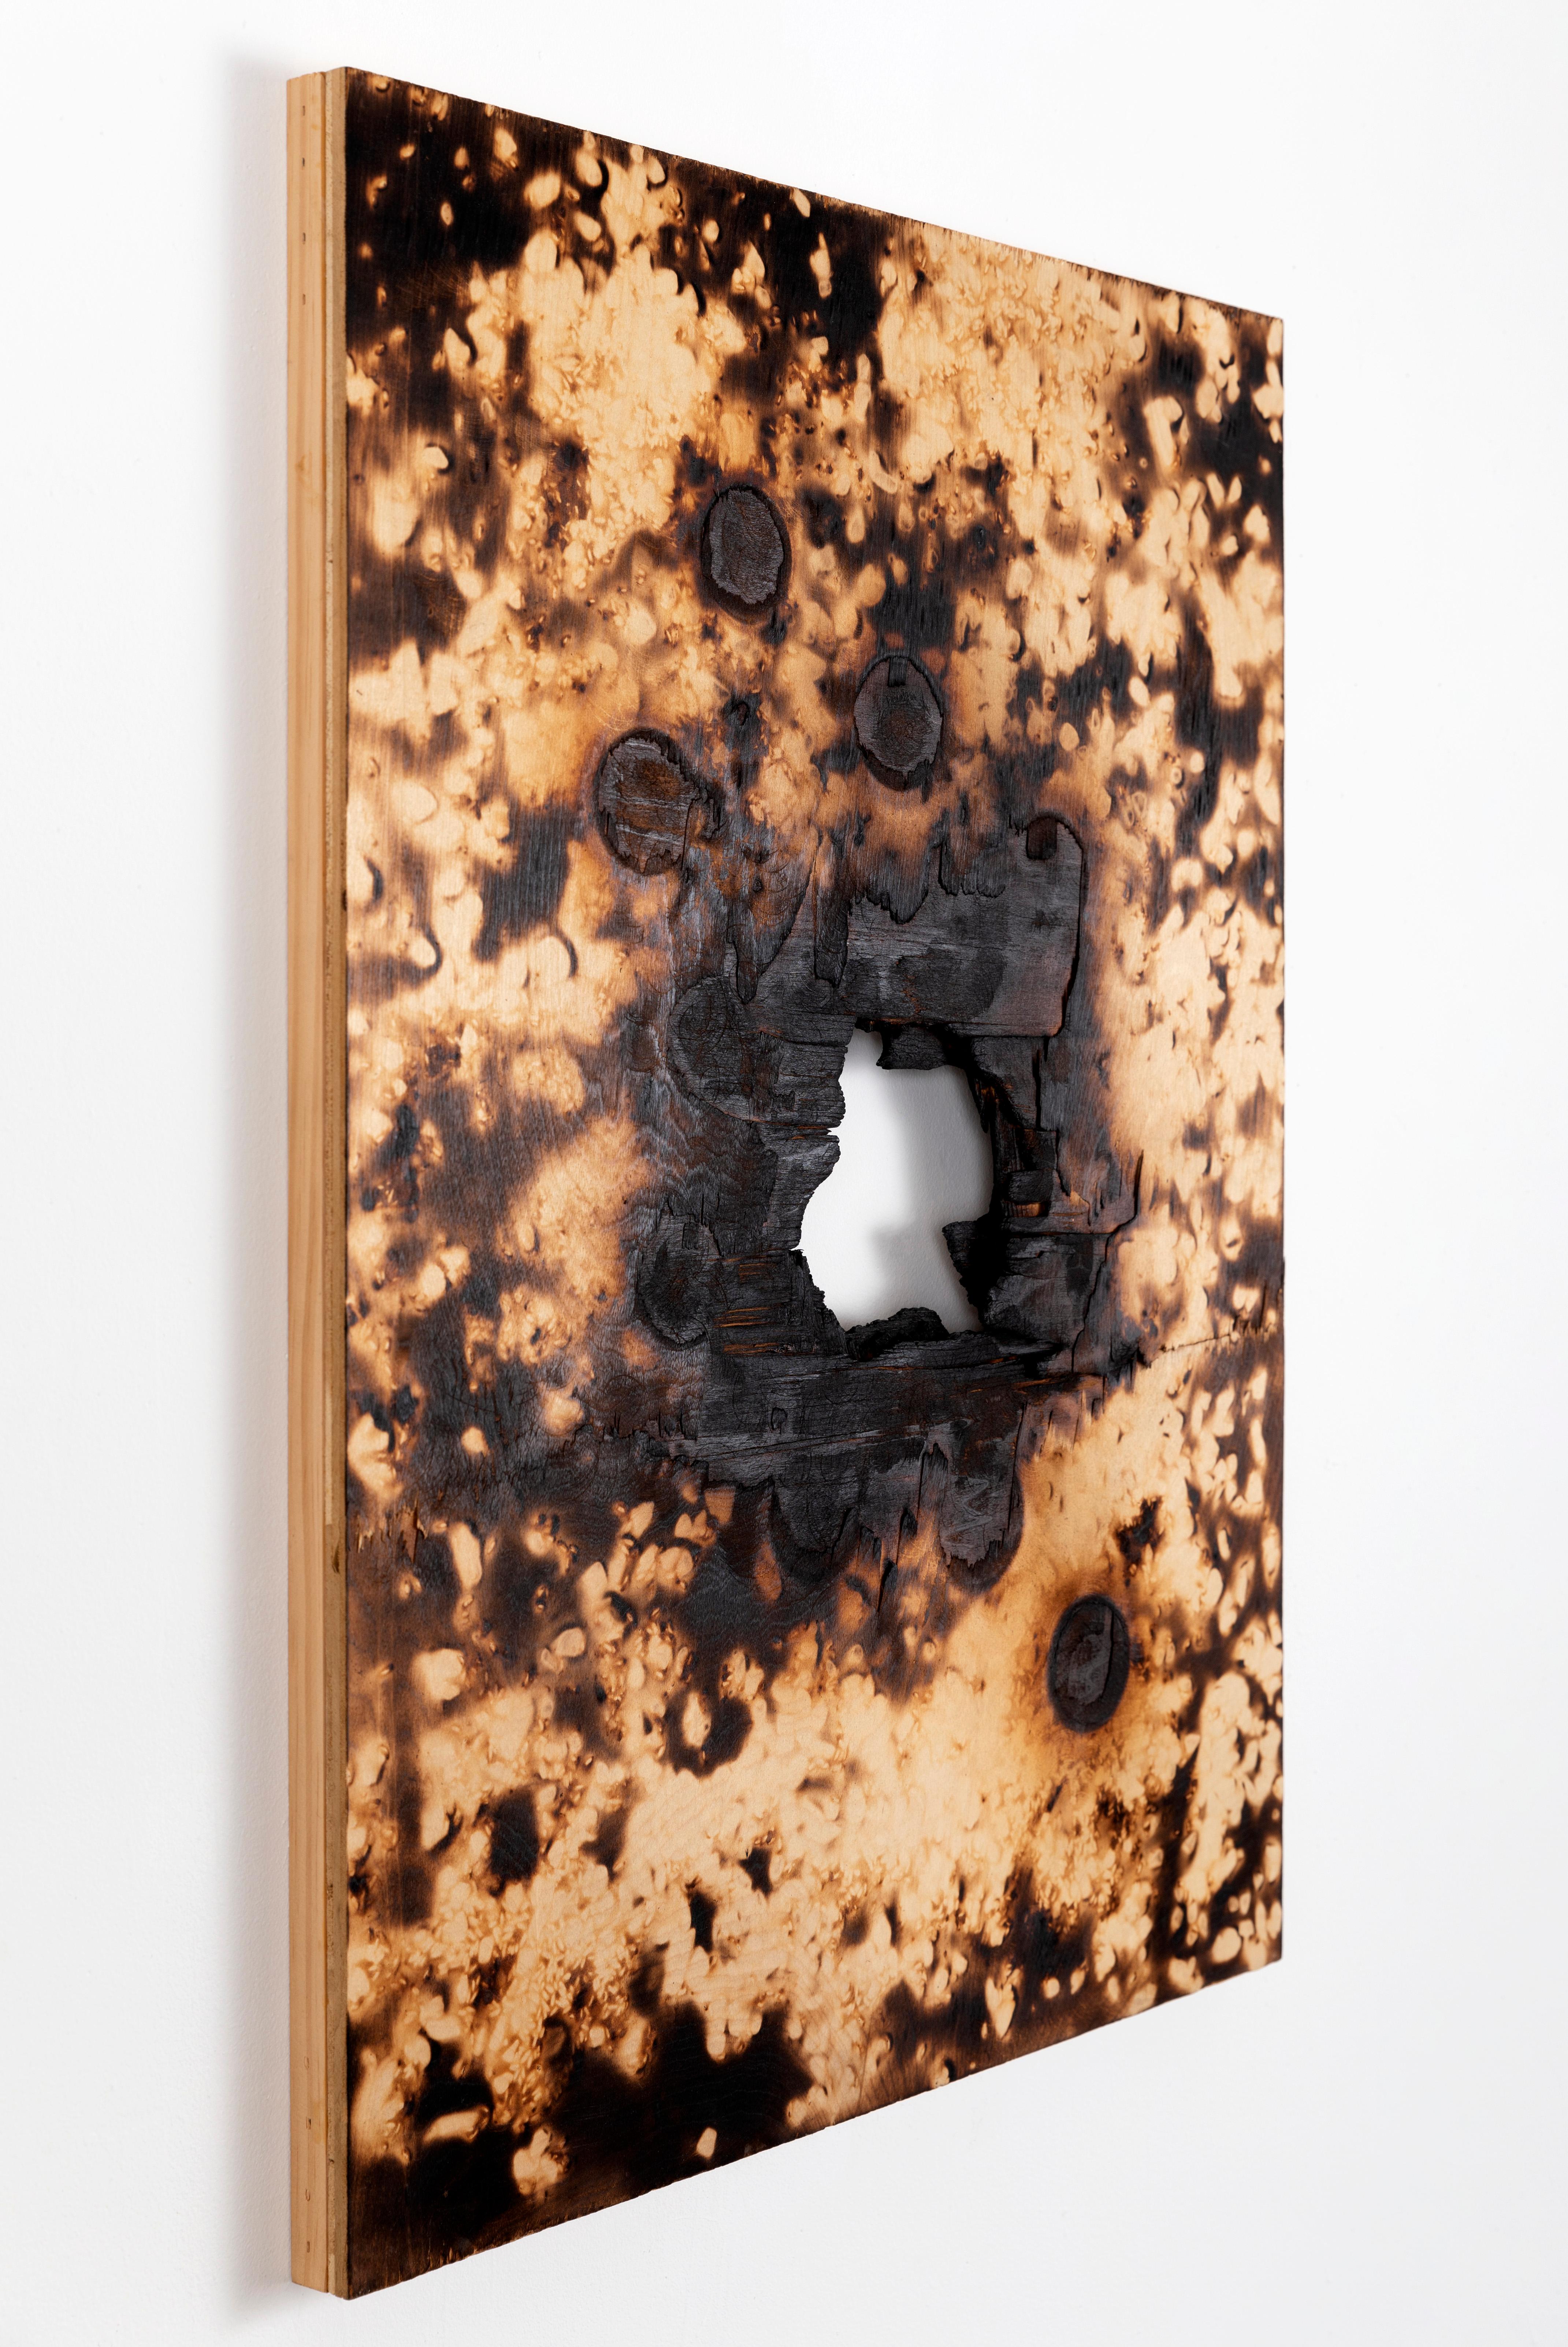 Pyre III, charred birch plywood abstract patterns earth tones created with fire - Painting by Michael Watson